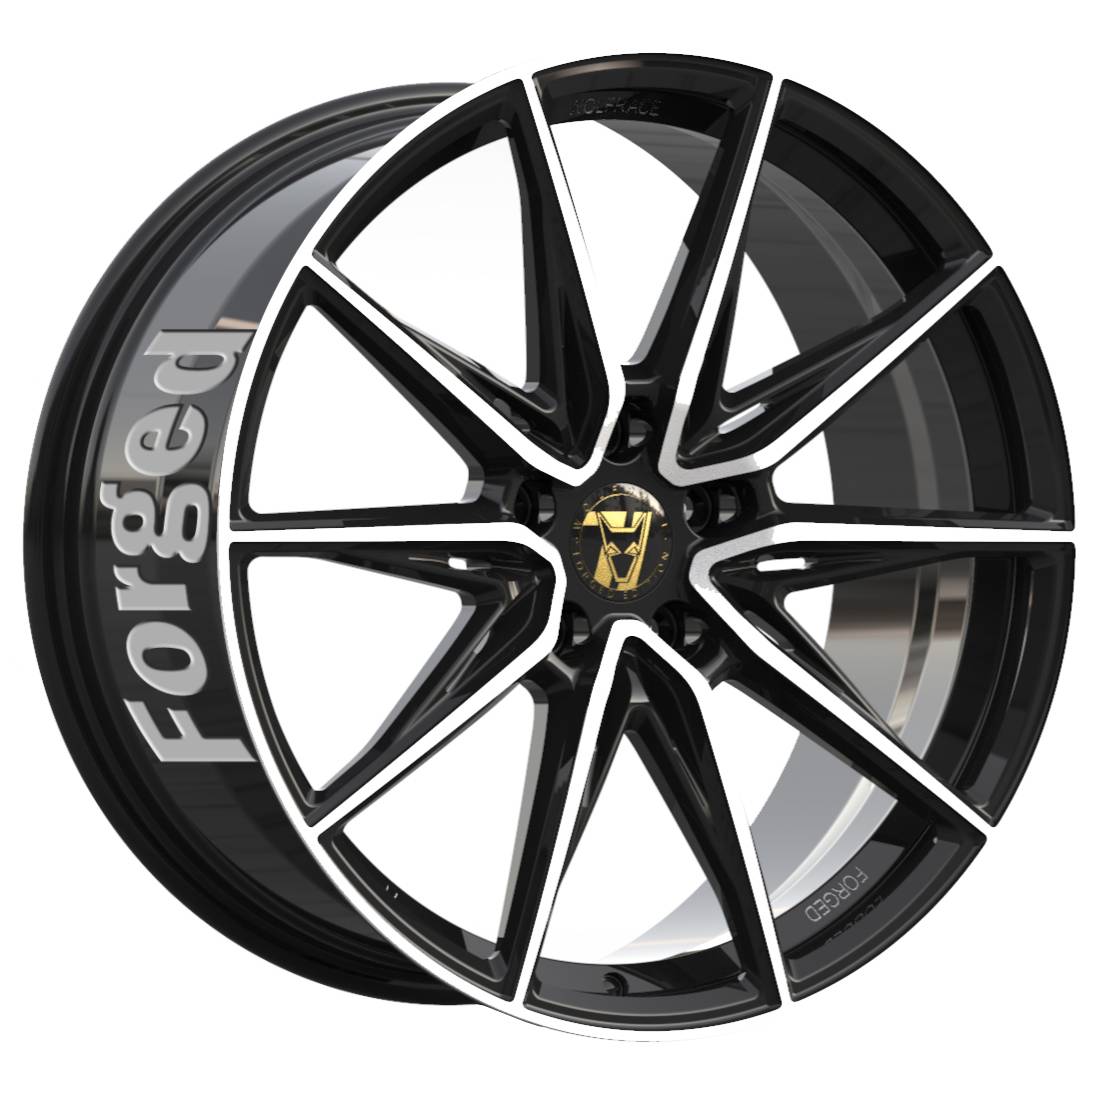 Jantes alu Demon Wheels 71 Forged Edition Urban Racer Forged [8.5x20] -5x114.3- ET 40